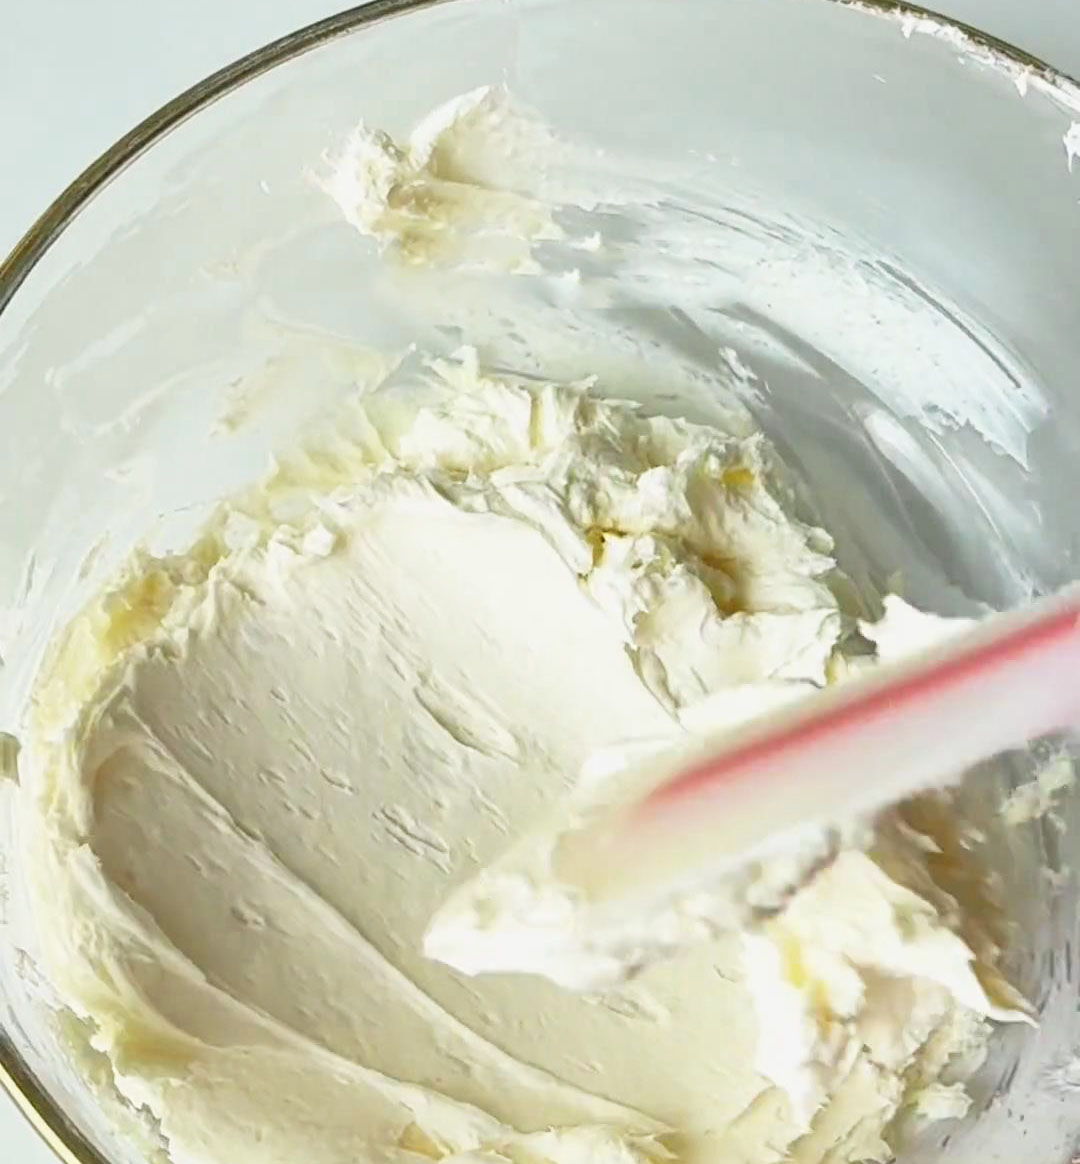 combine 200g of cream cheese with 30g of sugar